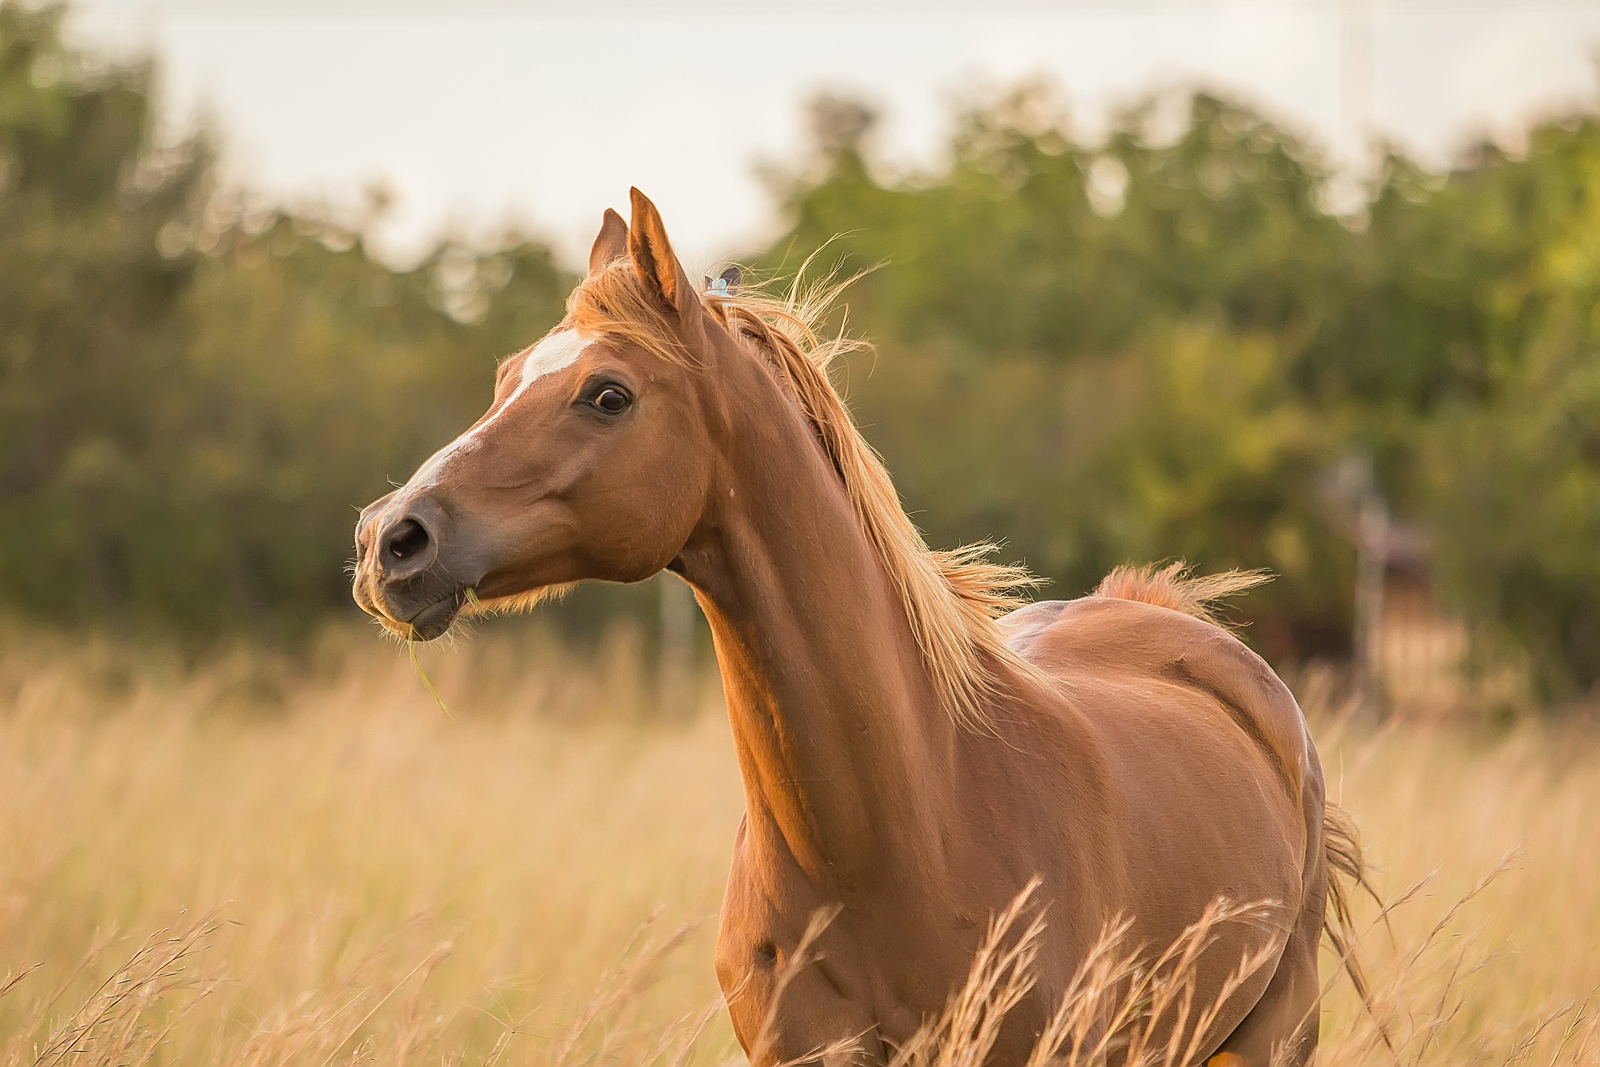 A horse wondering in a long grassed field